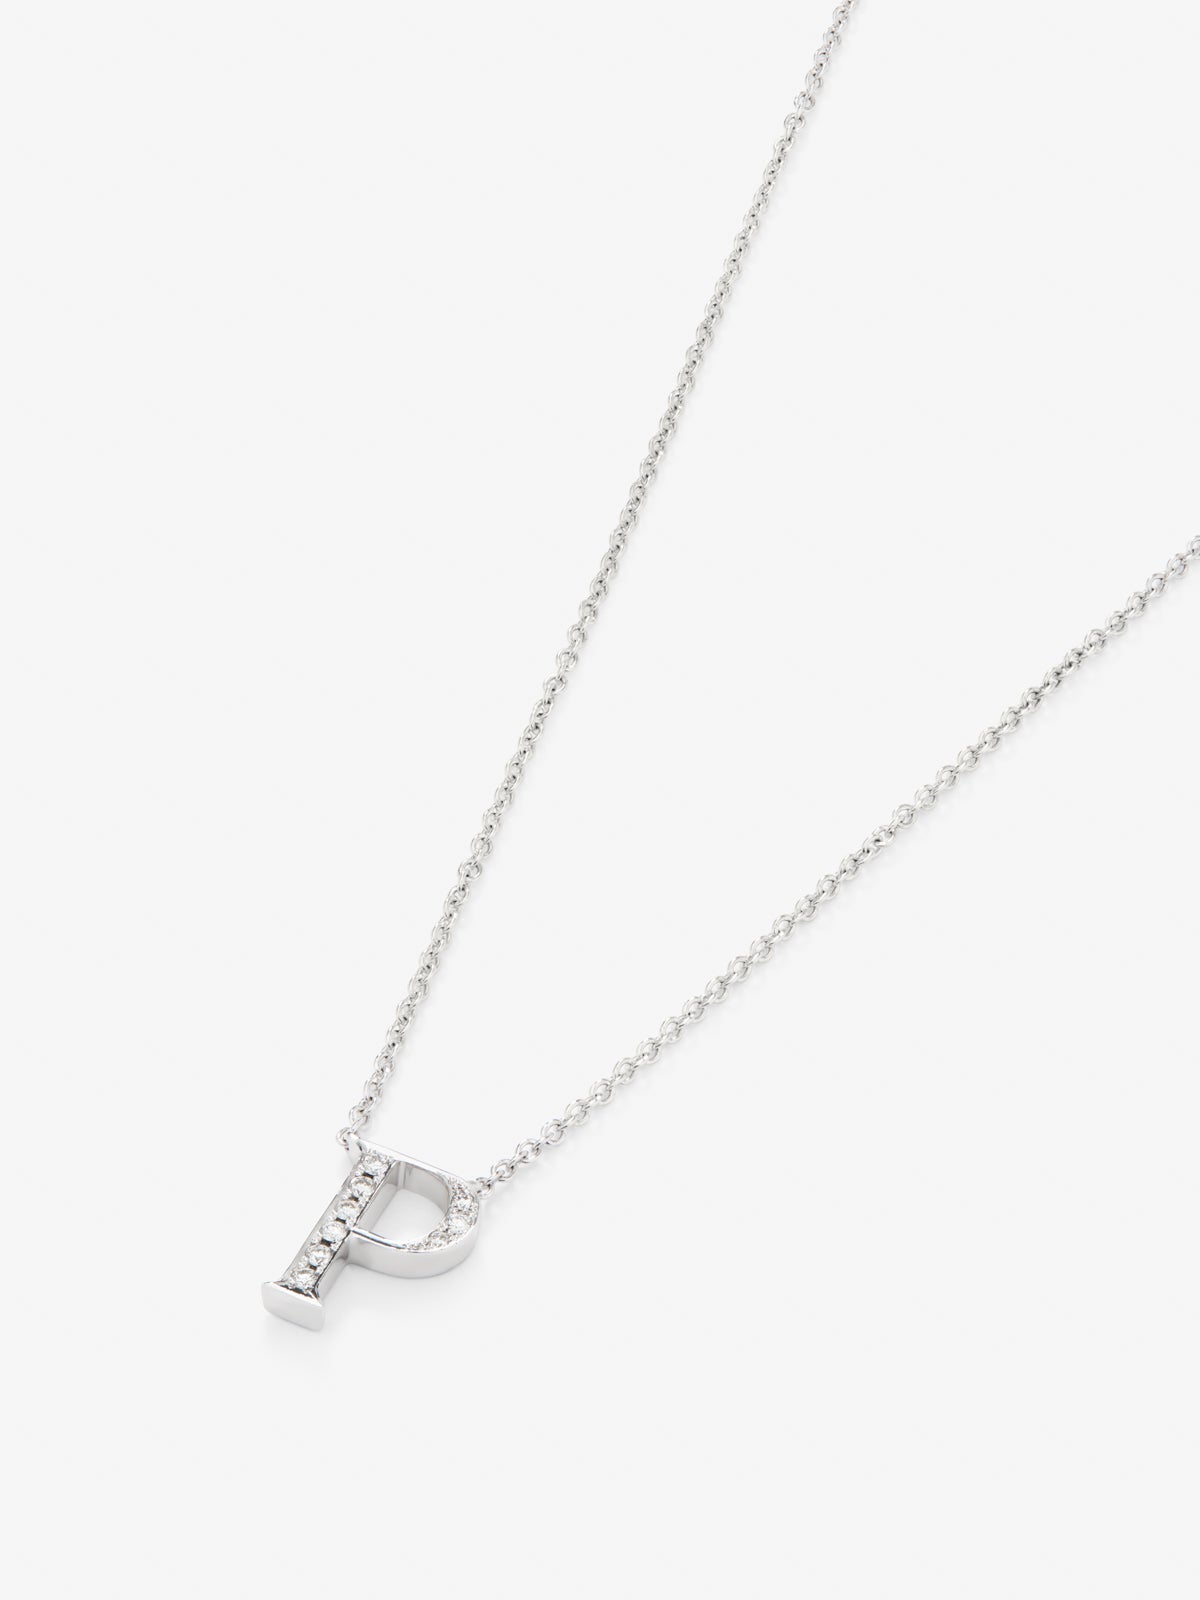 18K white gold pendant with letter P and 9 brilliant-cut diamonds with a total of 0.06 cts